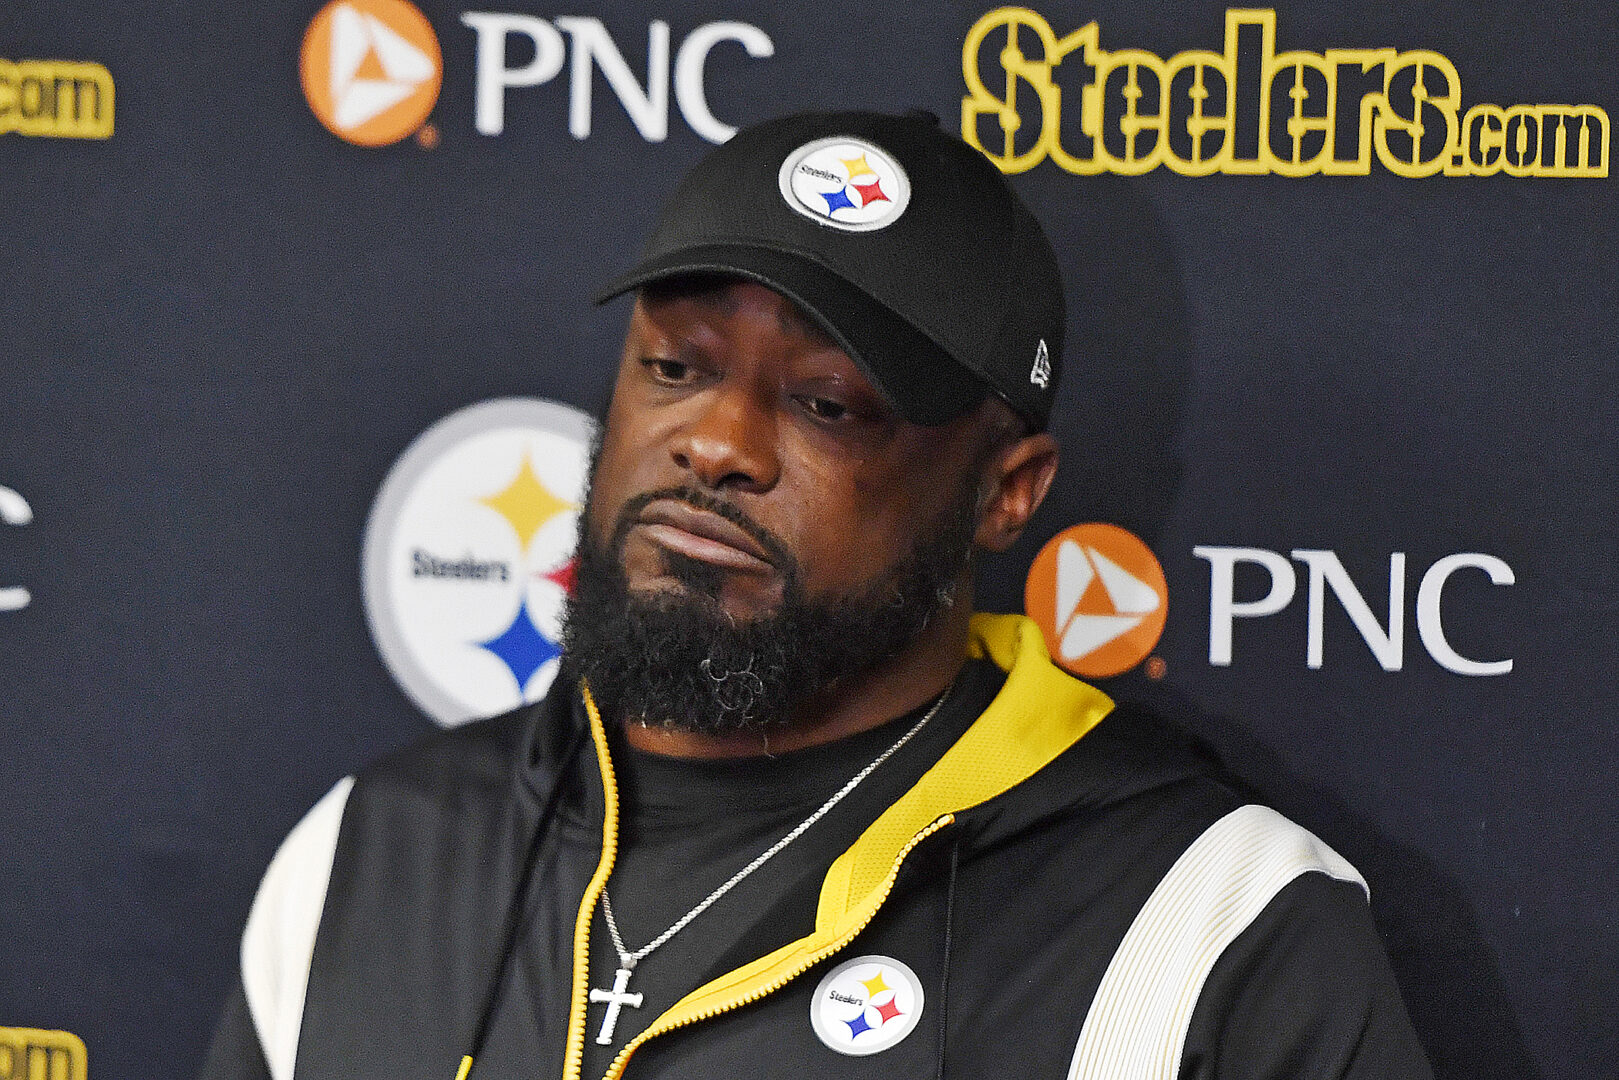 Pittsburgh Steelers head coach Mike Tomlin meets with reporters after an NFL football game against the Buffalo Bills in Pittsburgh, Sunday, Oct. 9, 2022. The Bills won 38-3.